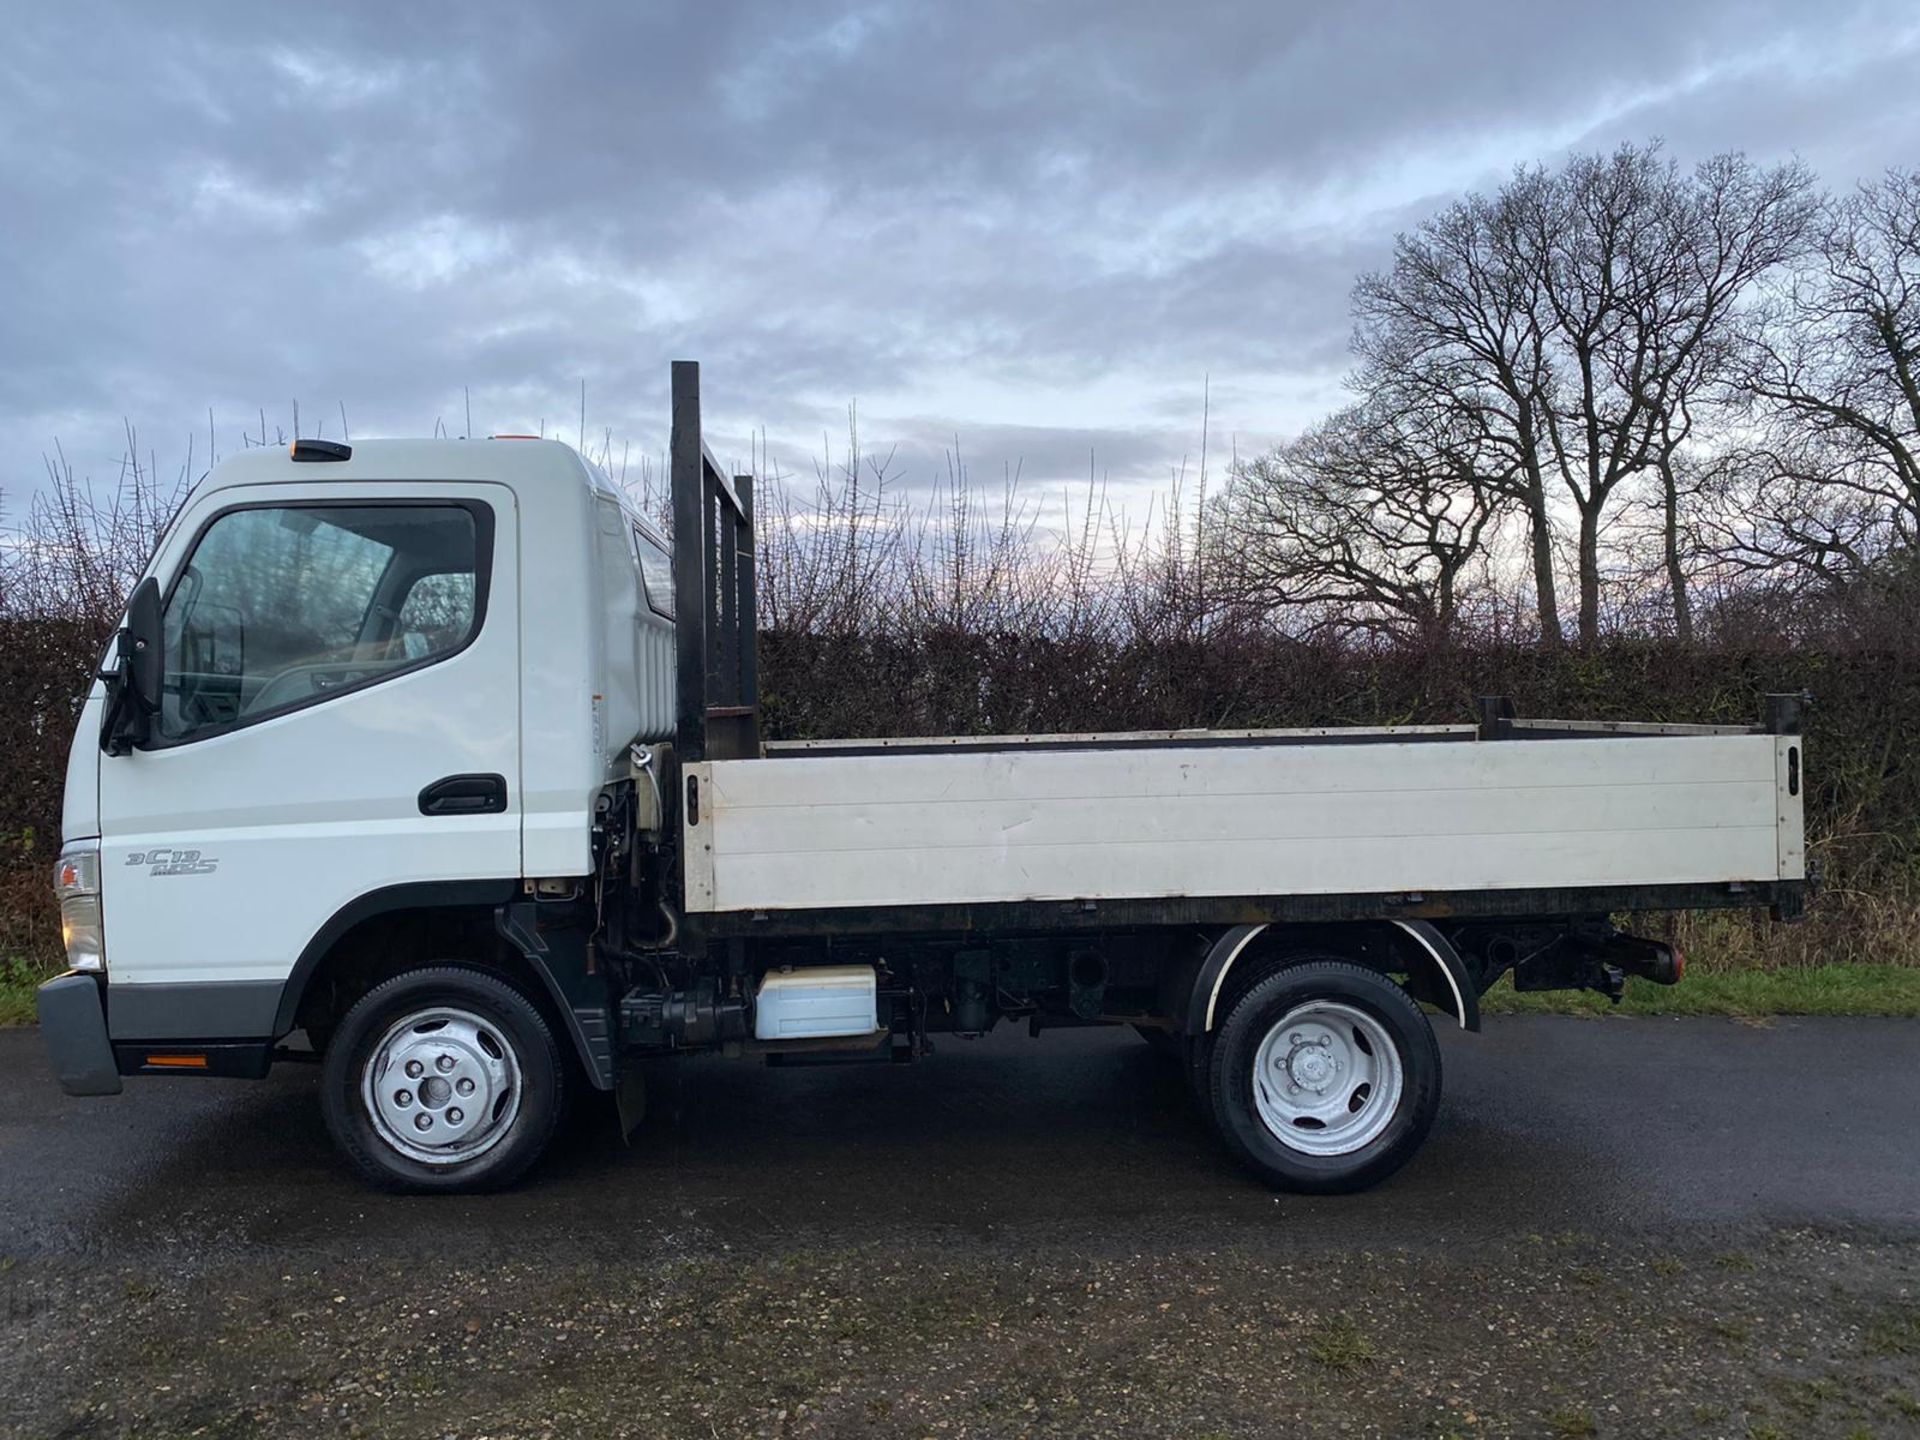 2012/12 REG MITSUBISHI FUSO CANTER 3C13-25 SWB 3.0 DIESEL WHITE TIPPER, SHOWING 0 FORMER KEEPERS - Image 4 of 10